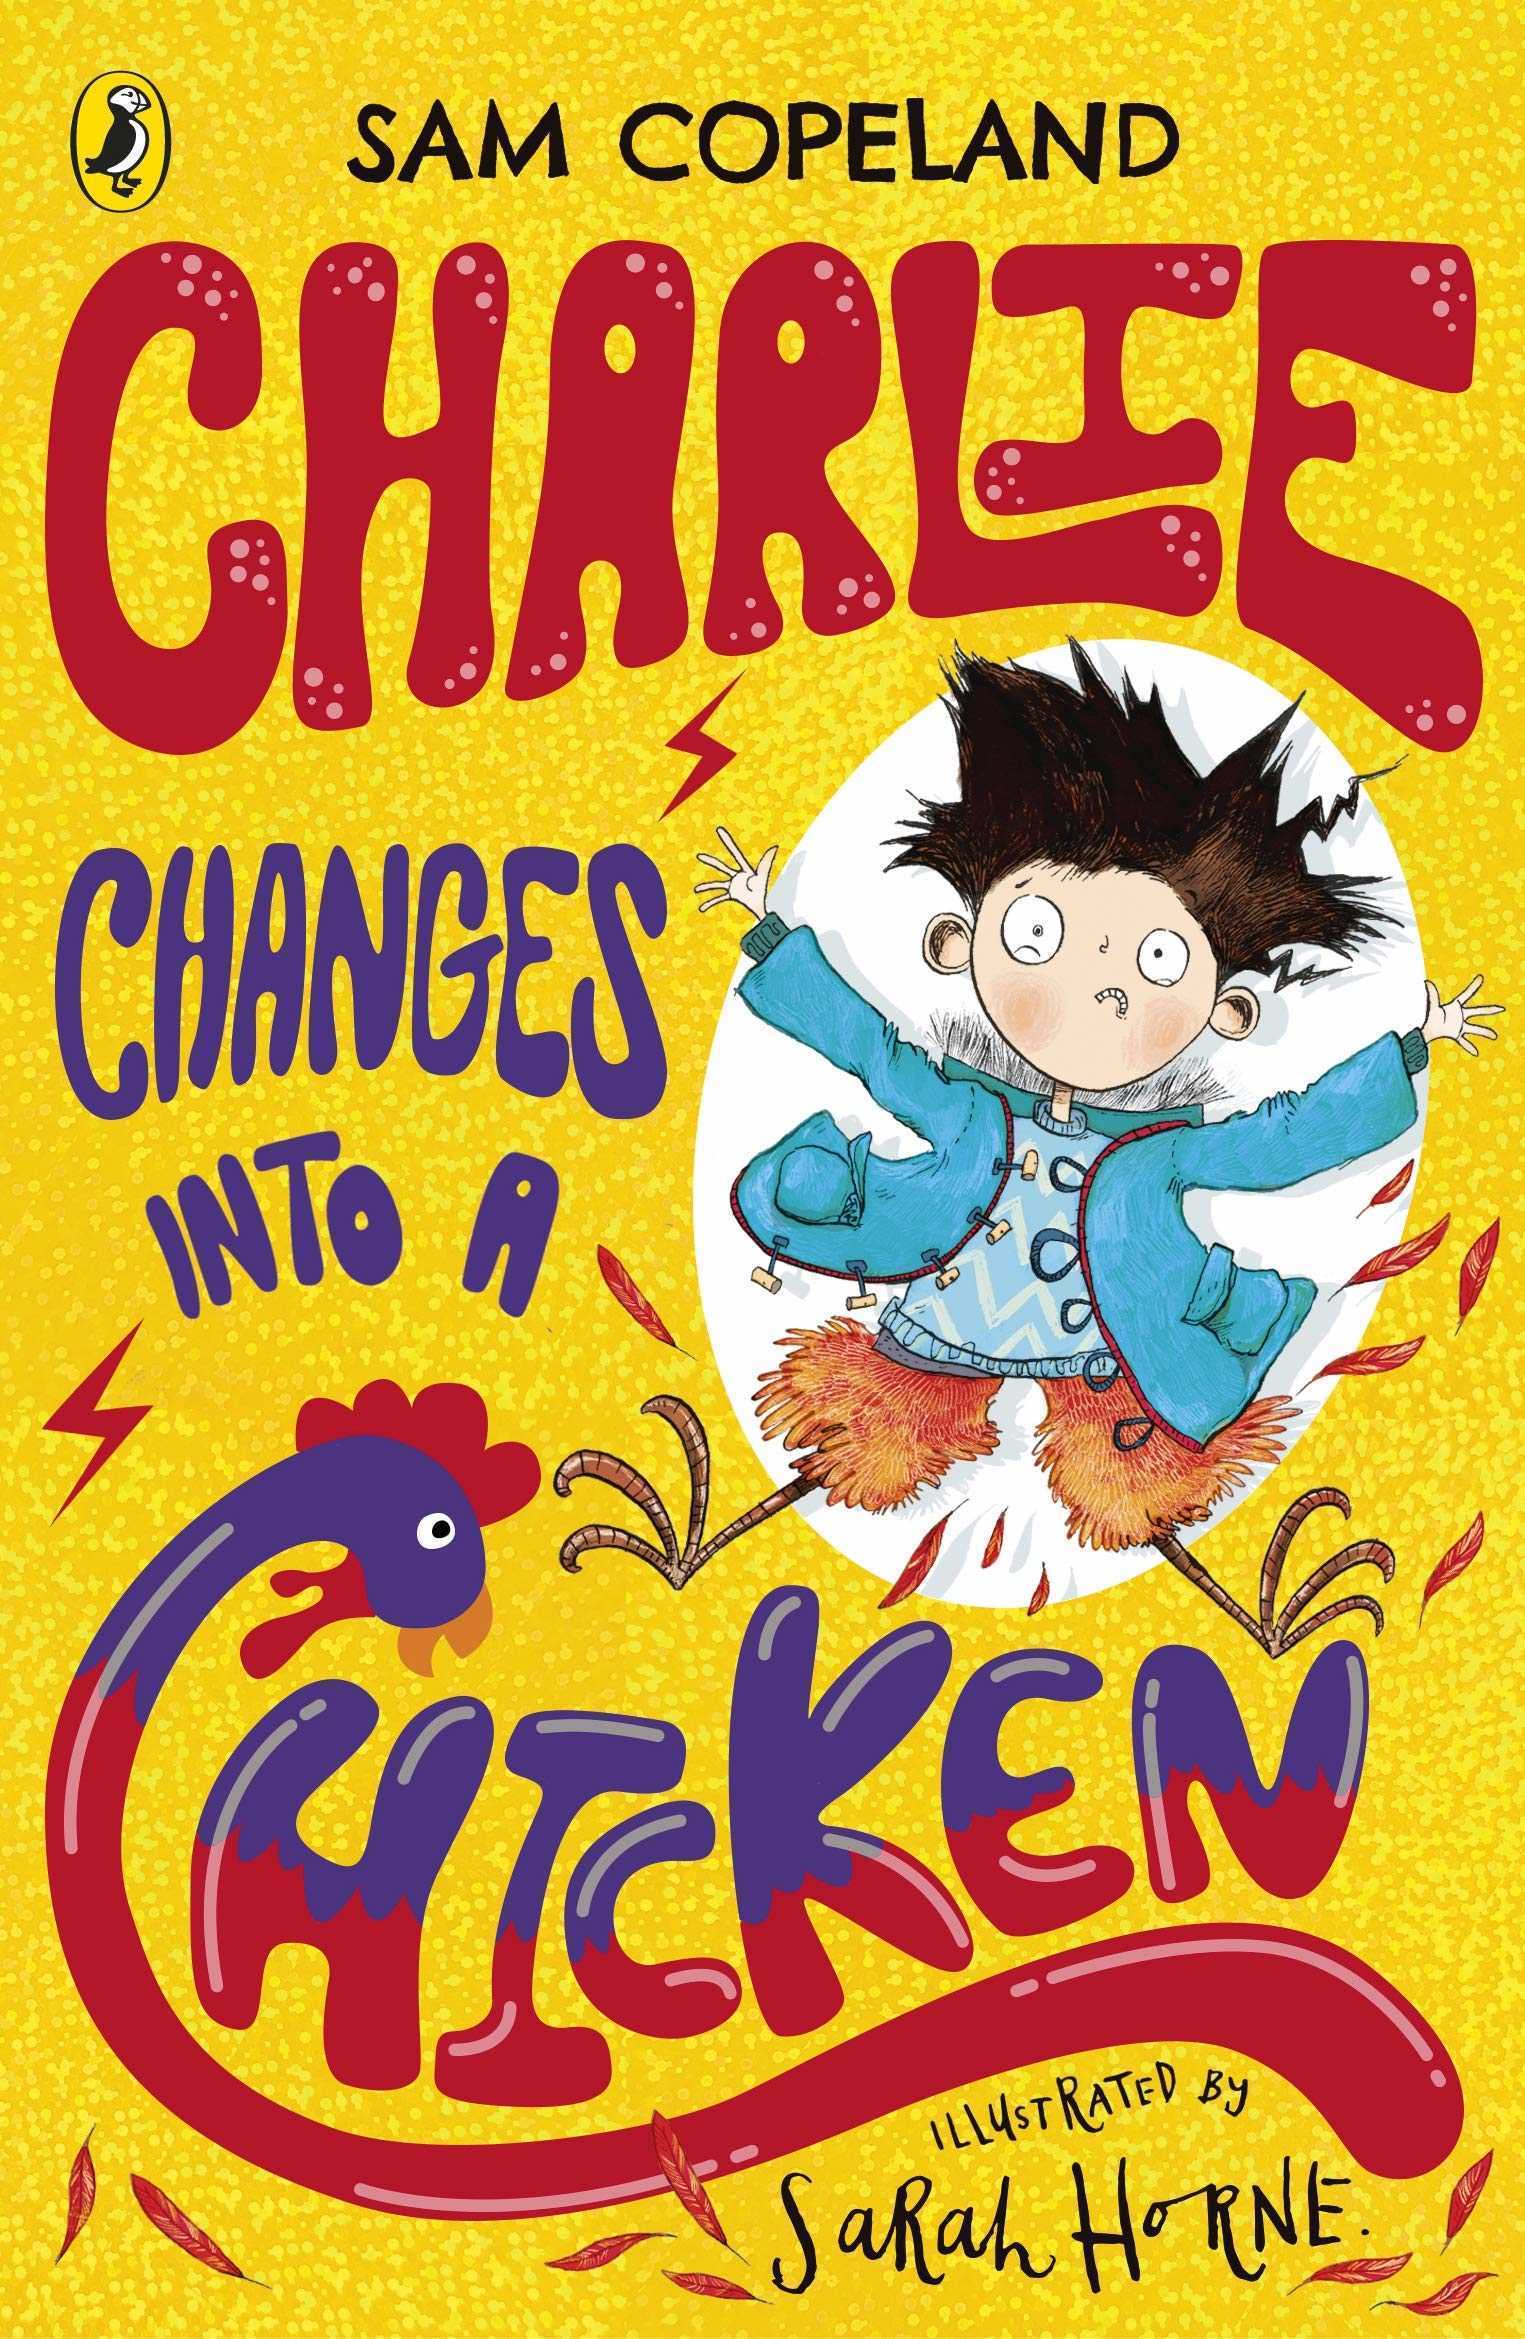 Charlie Changes Into a Chicken